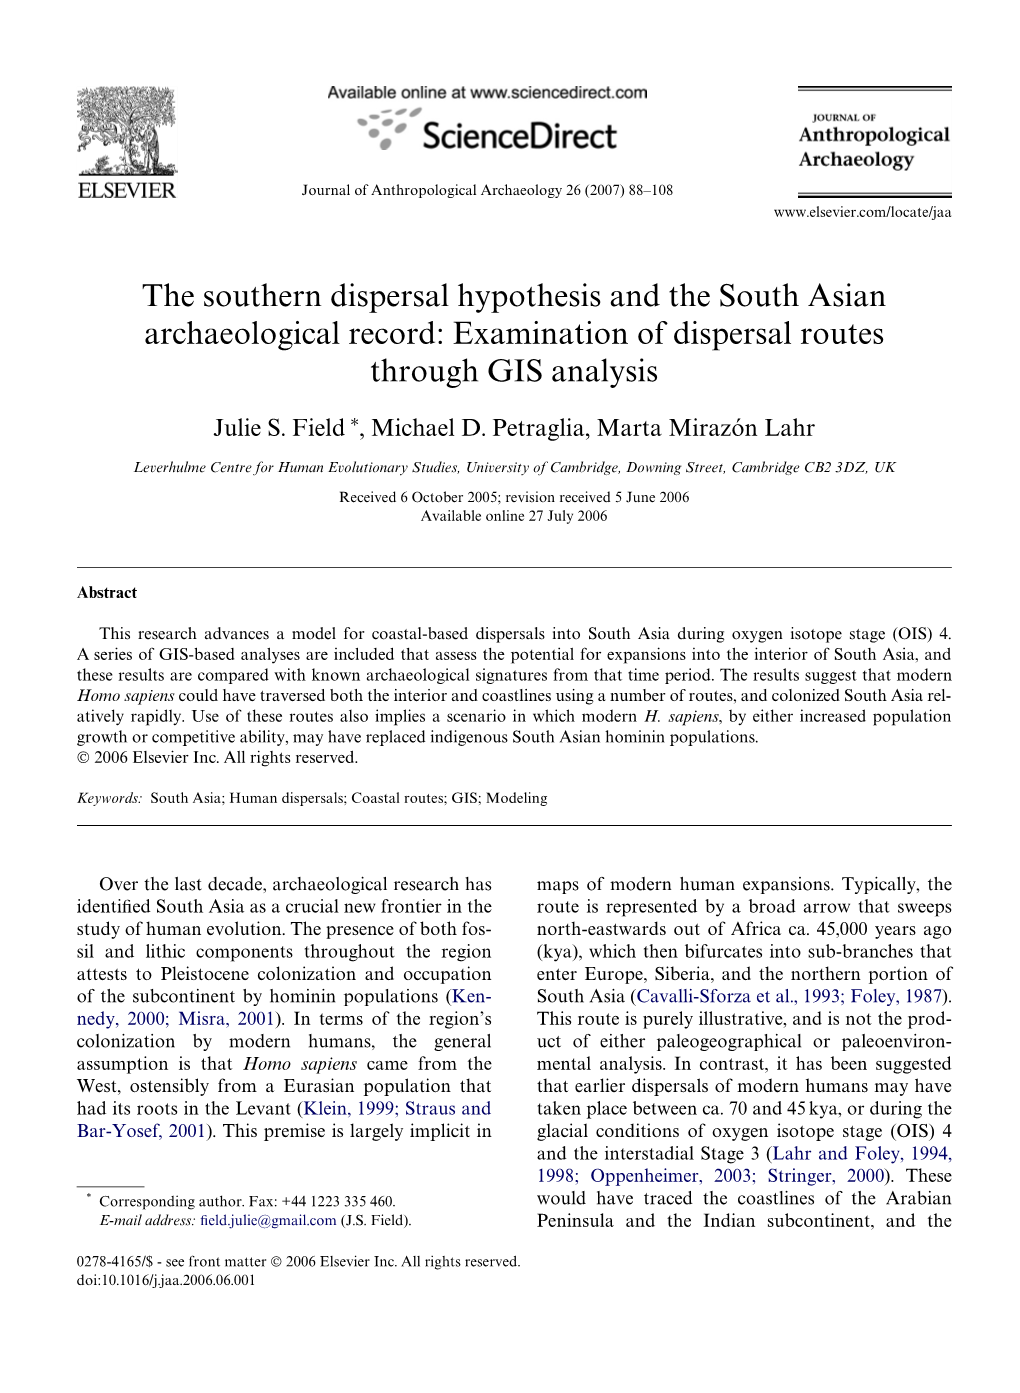 The Southern Dispersal Hypothesis and the South Asian Archaeological Record: Examination of Dispersal Routes Through GIS Analysis